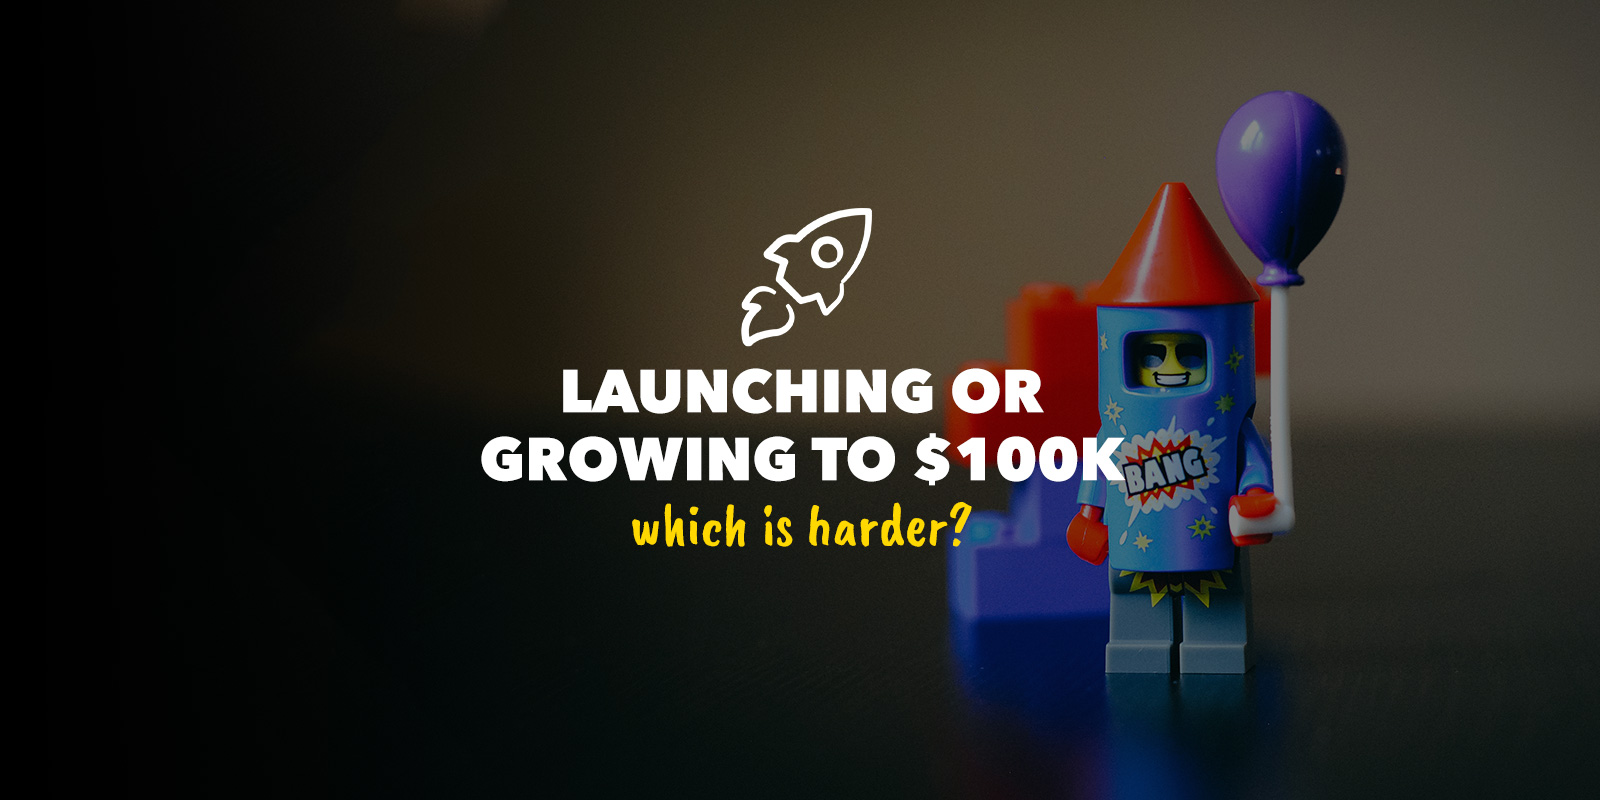 launching or growing to $100,000, which is harder?